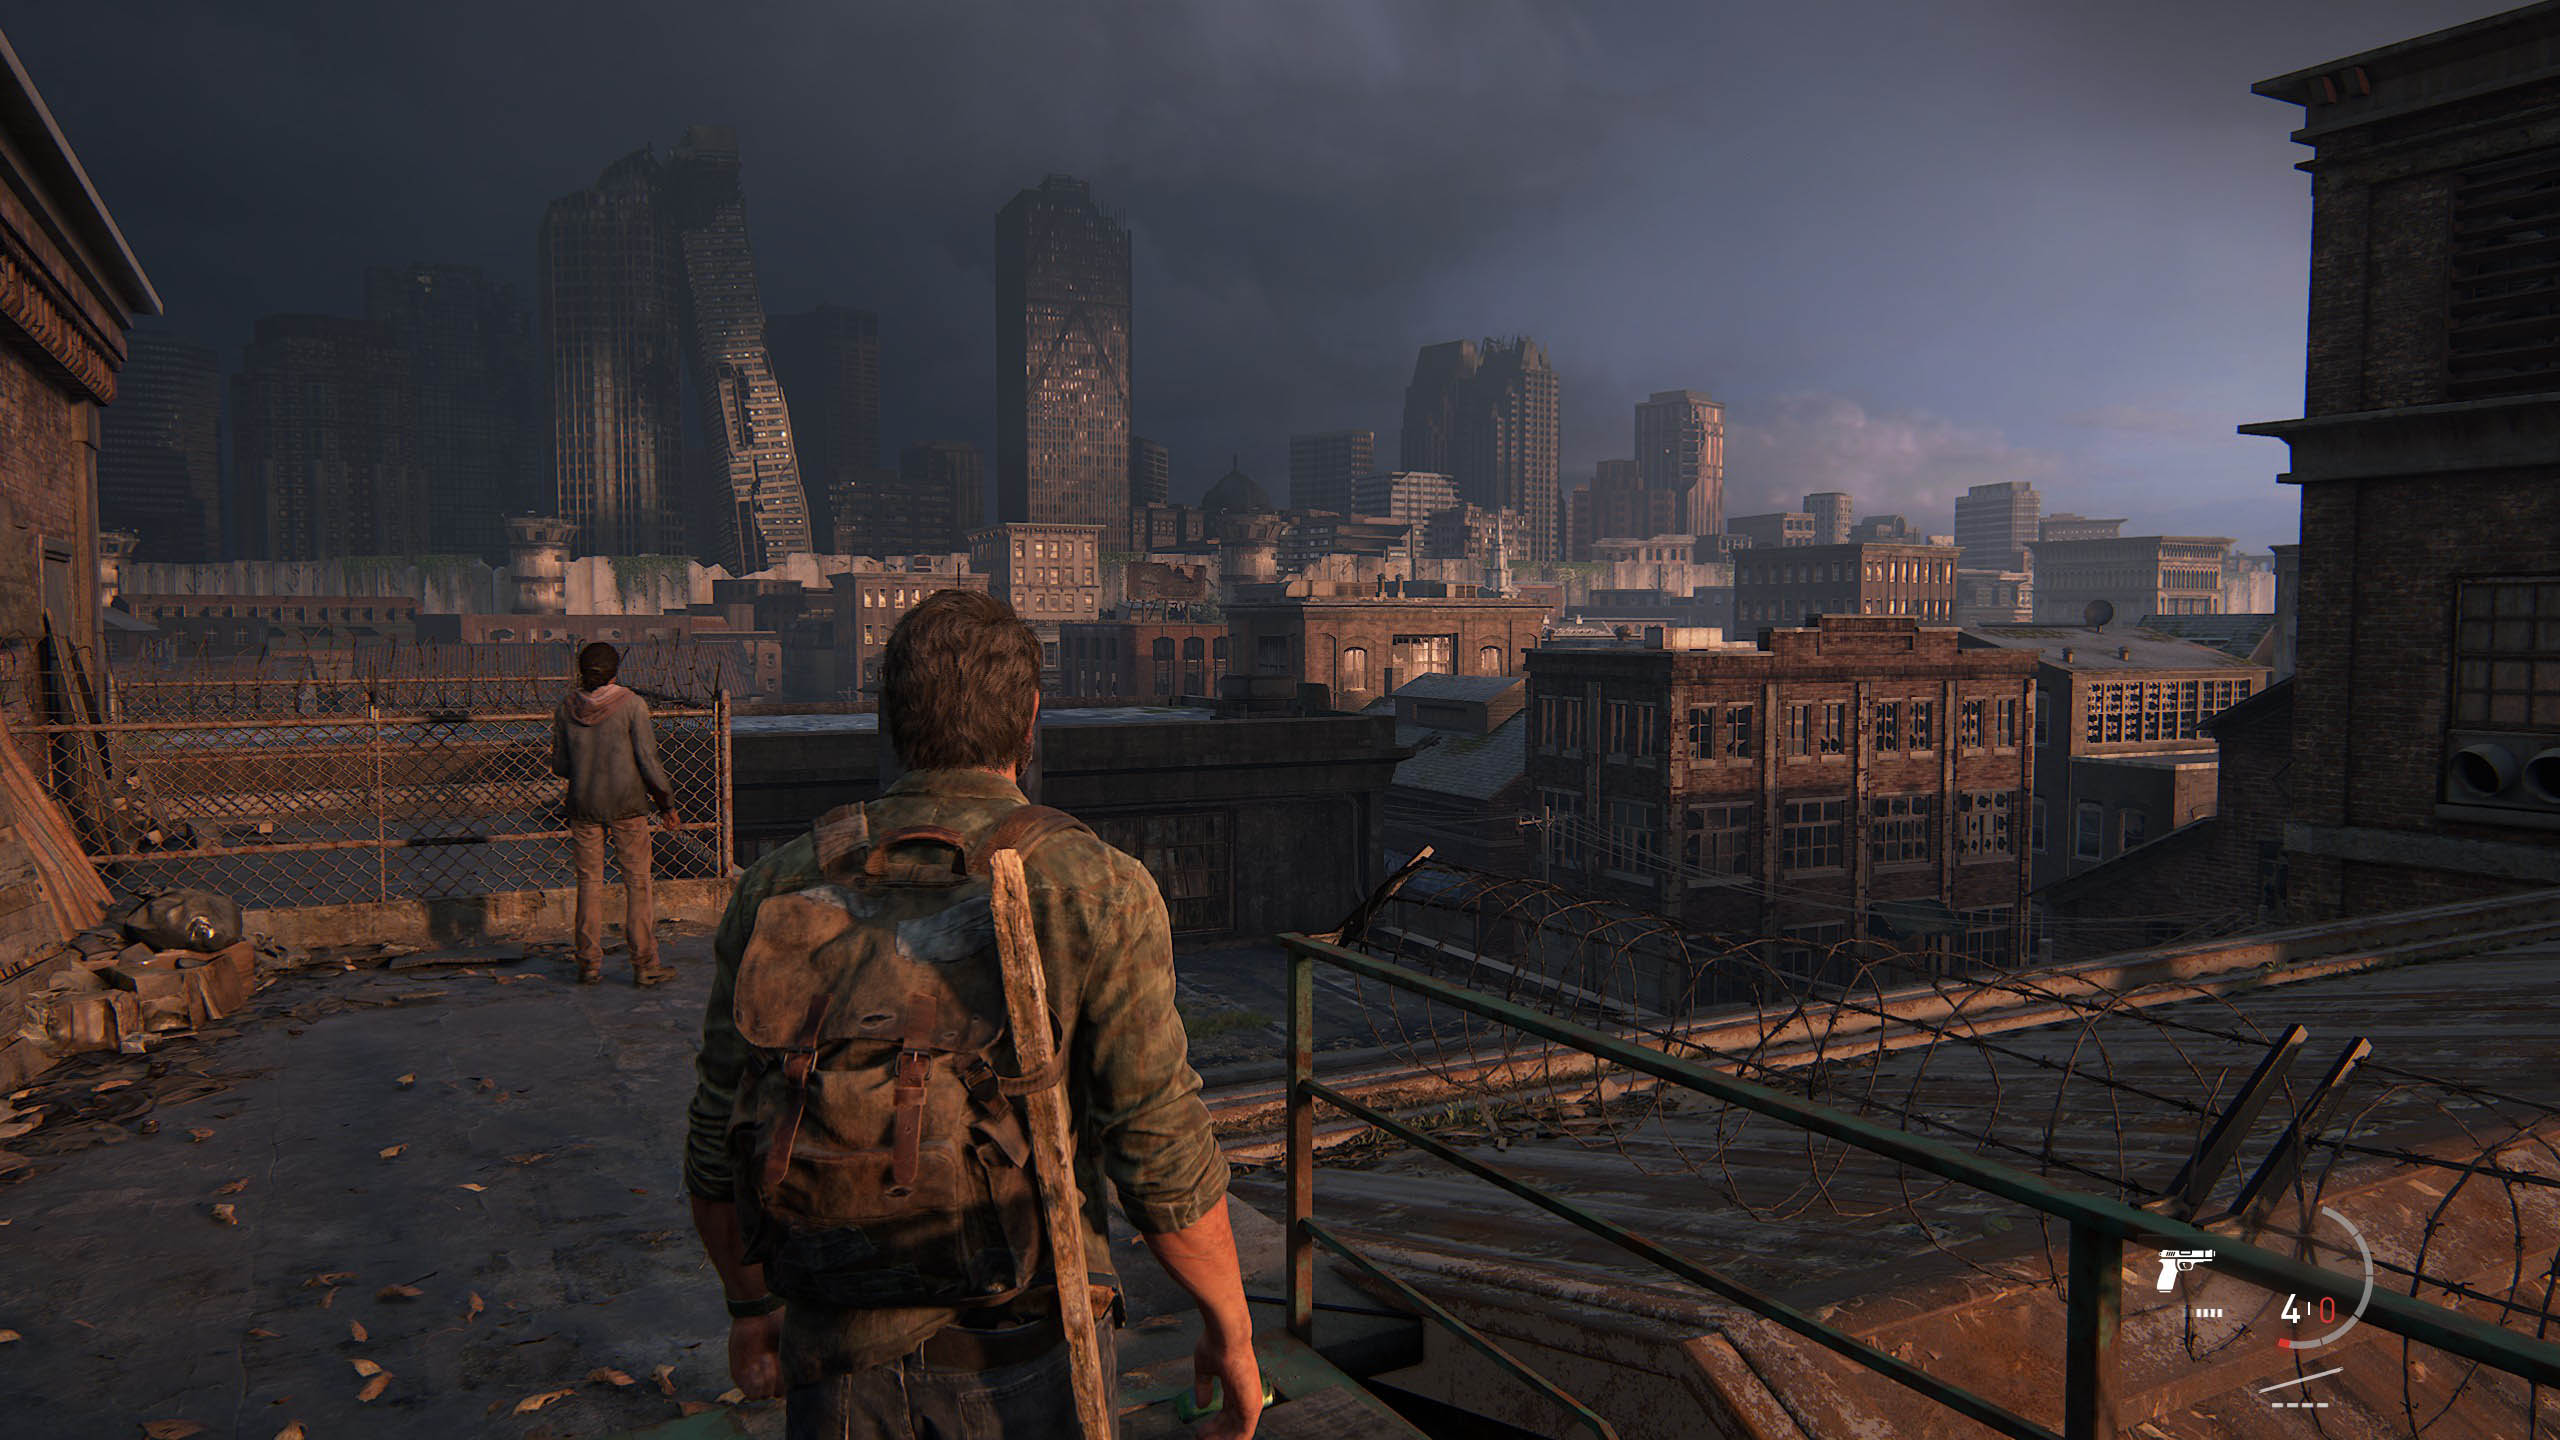 The Last of Us on PC in September? - Overclocking.com